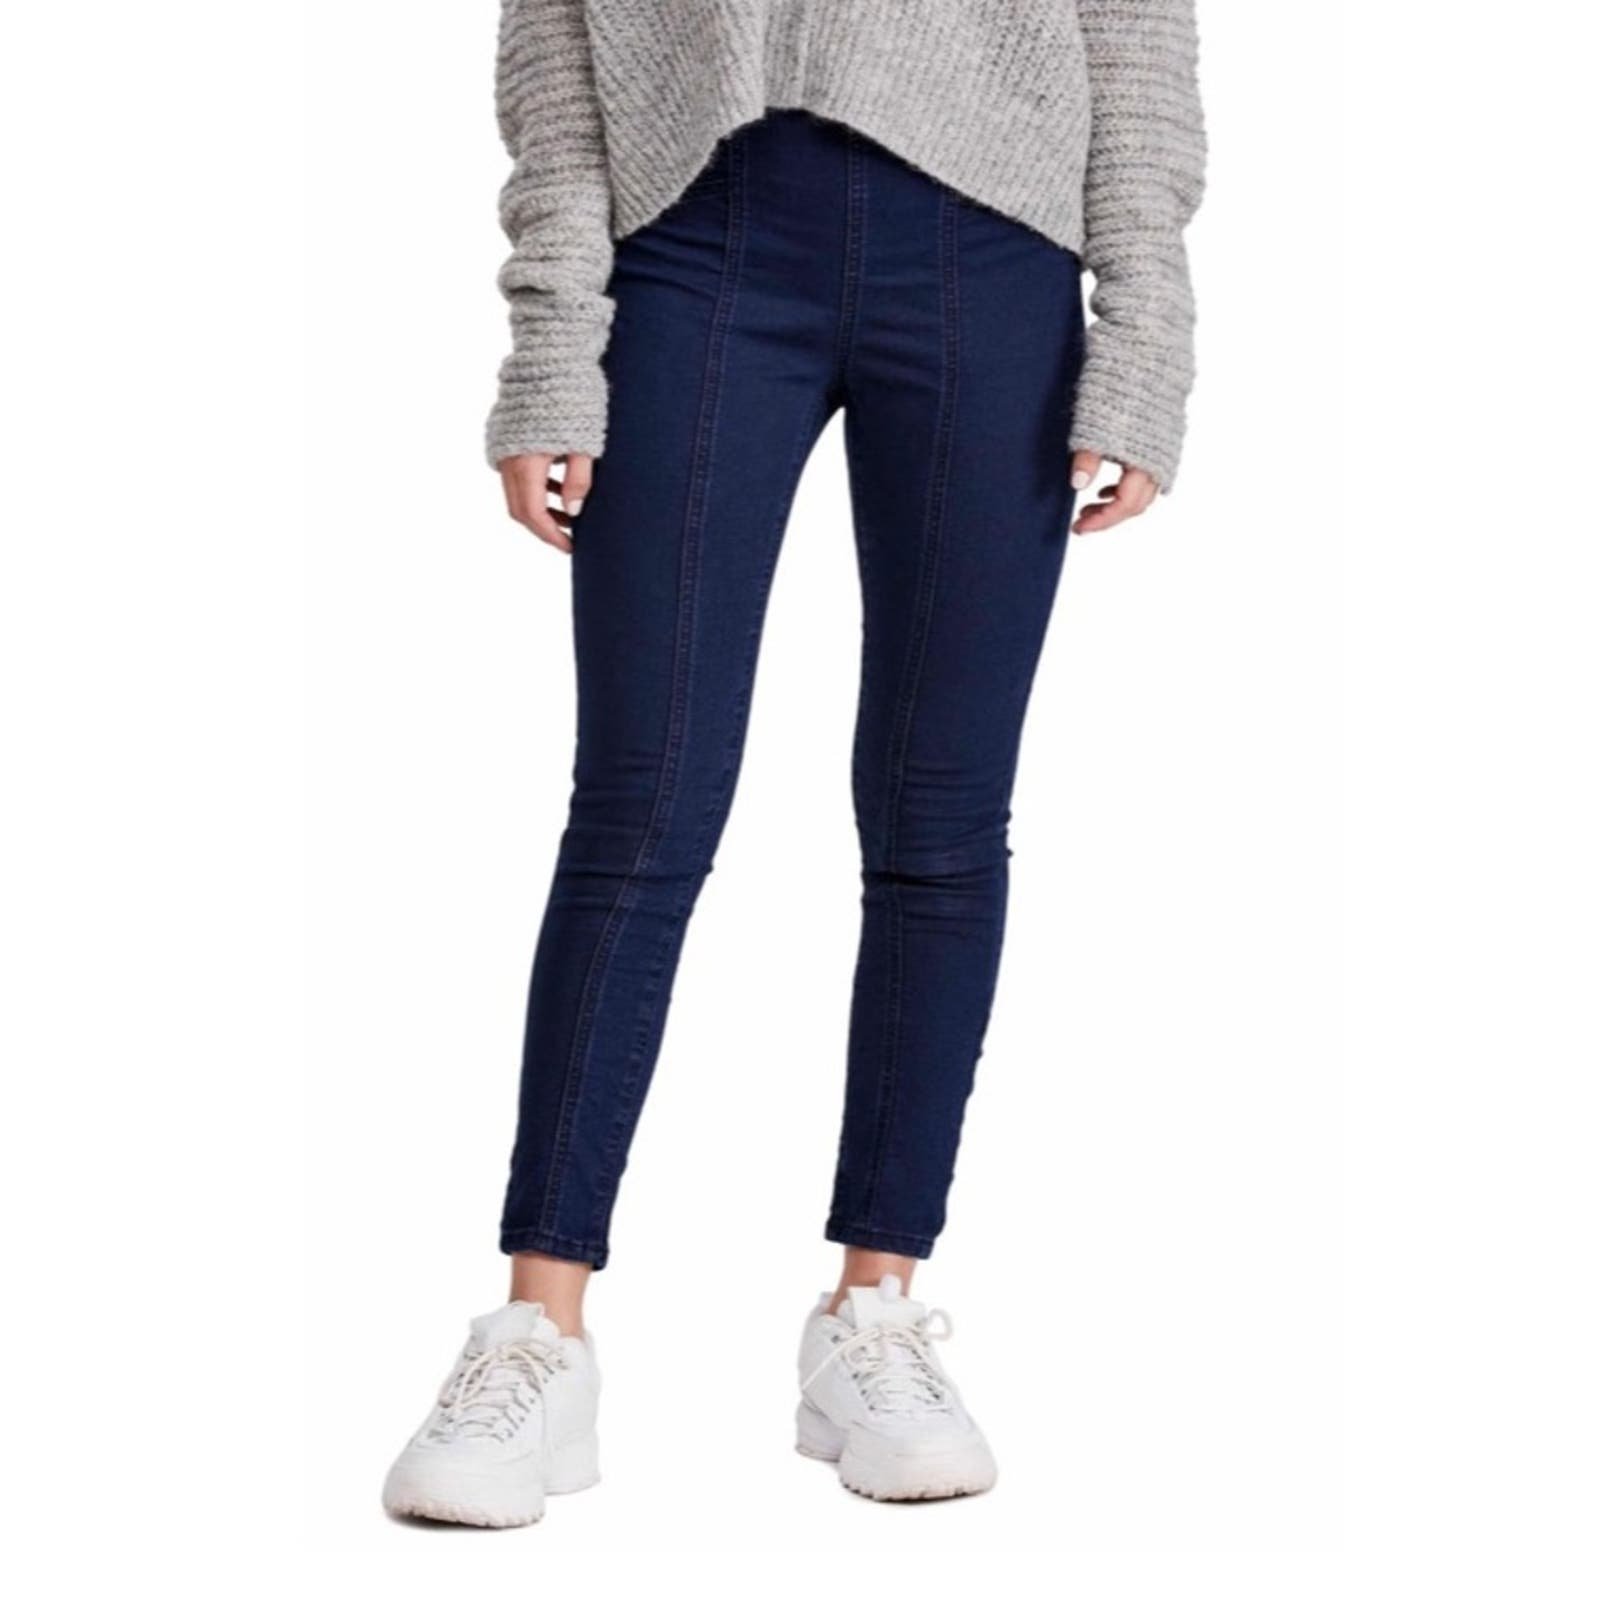 Discounted Free People Feel Alright Skinny Jeans n7BFt6pbq High Quaity